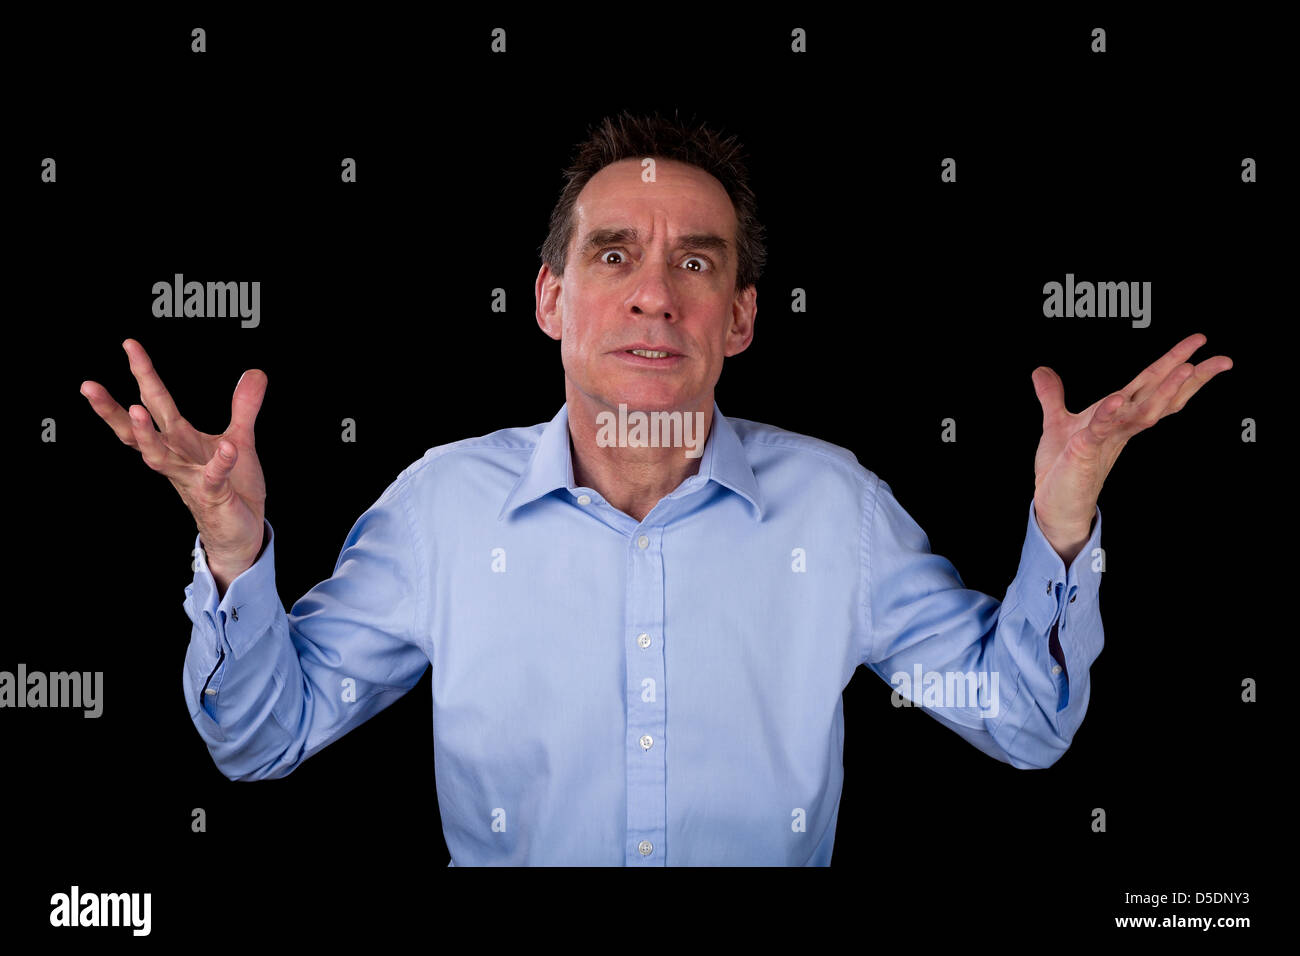 Angry Frustrated Middle Age Business Man Hands Raised Black Background Stock Photo